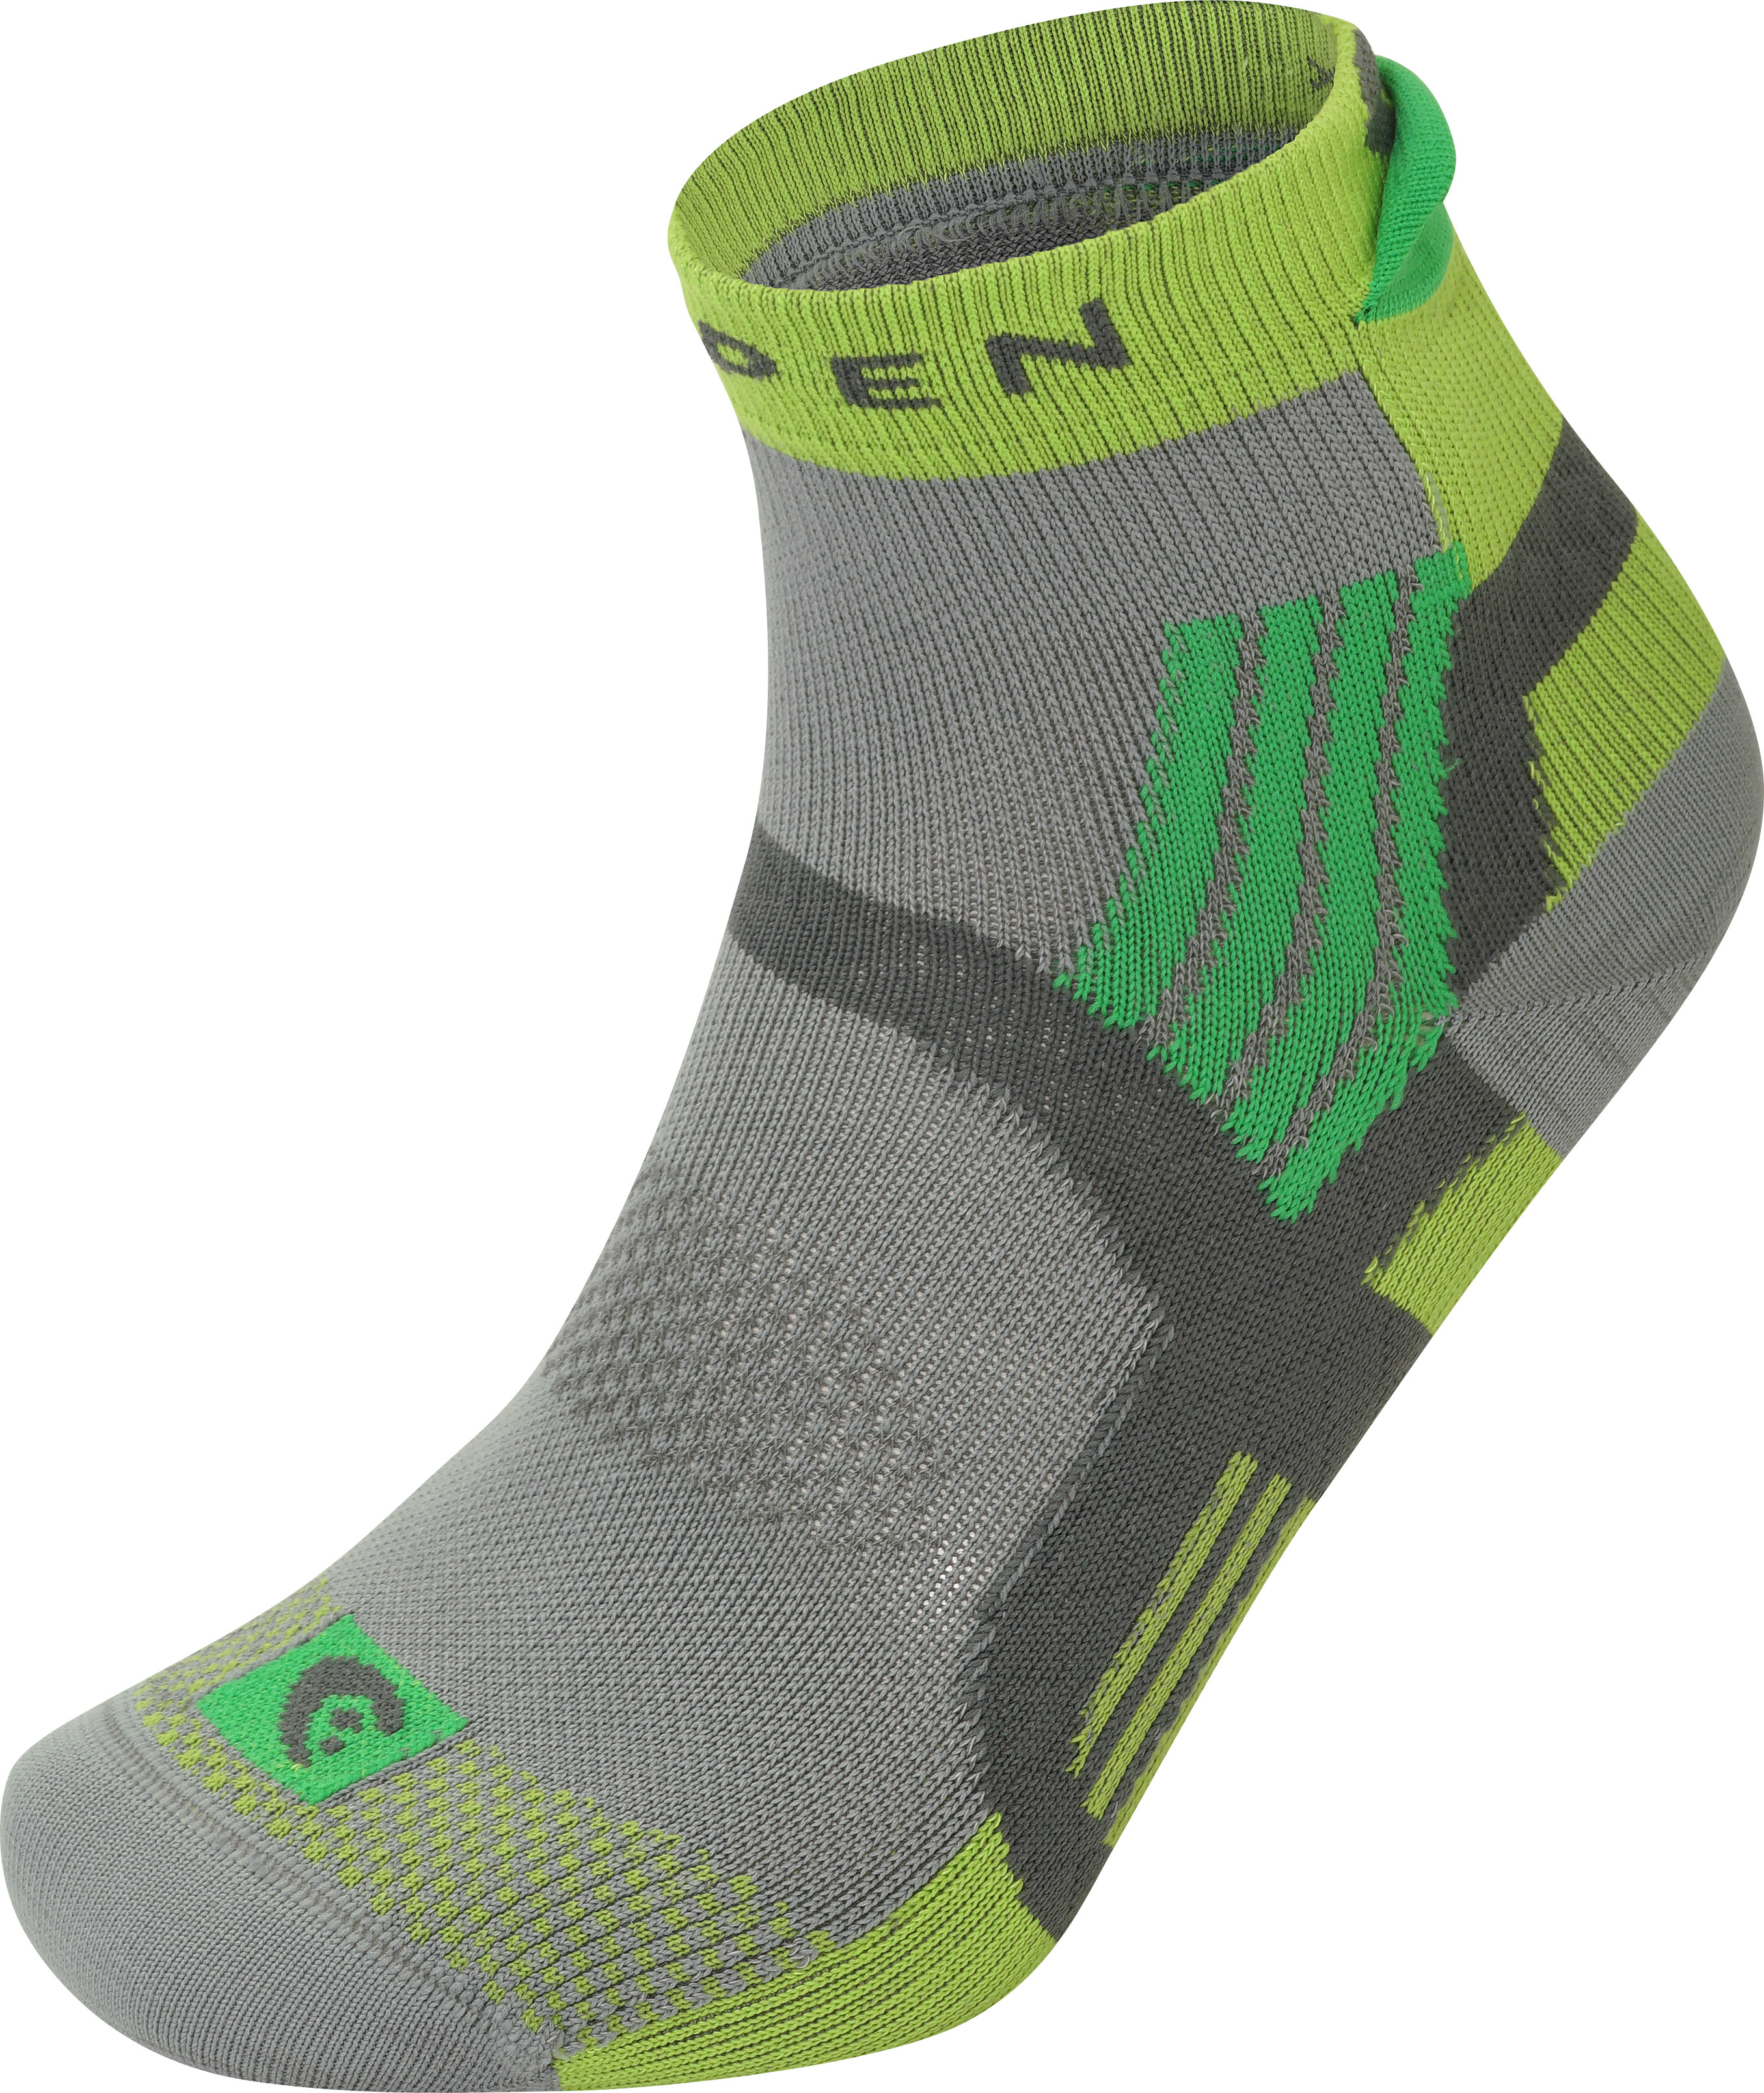 Smart socks from Lorpen for mountain running